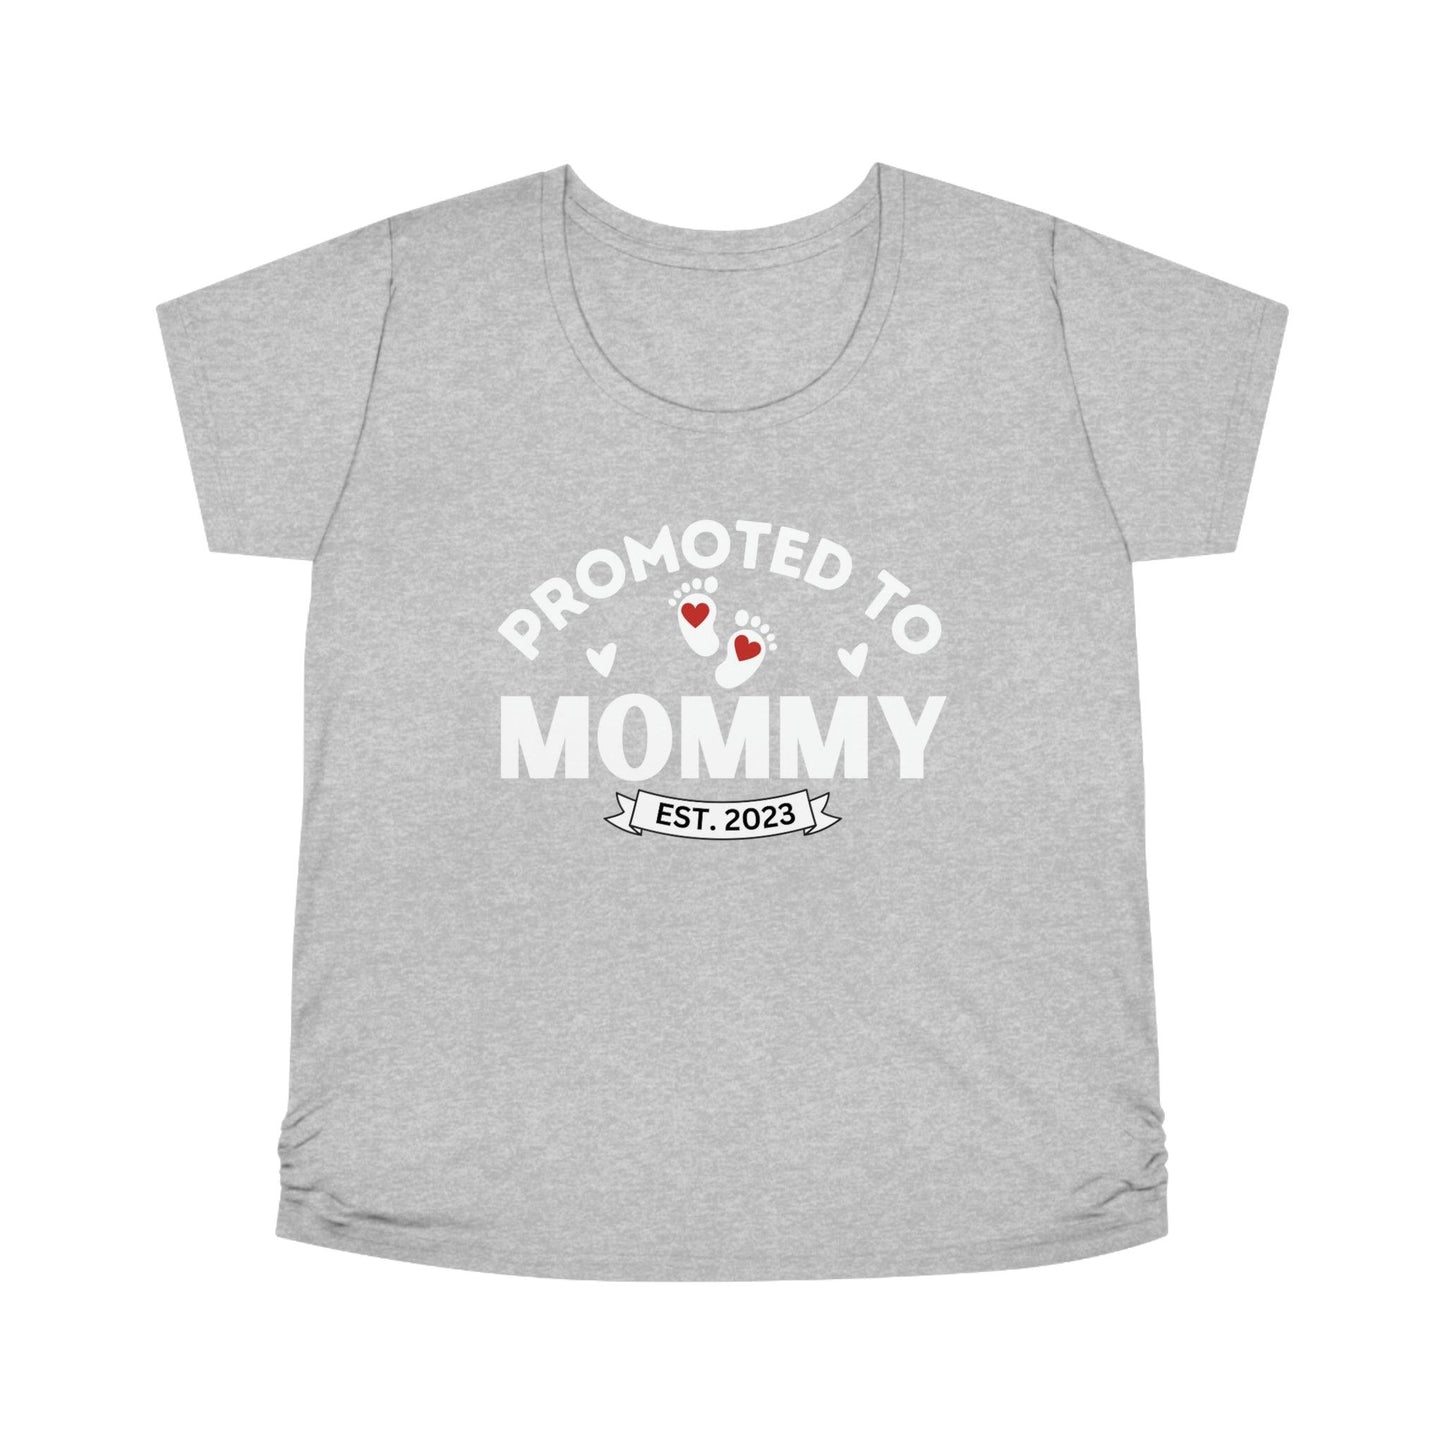 Promoted to Mommy shirt - New Mom tee - baby shower gift - Mom shirt -Women's Maternity Tee - Gift for new mom - mom to be gift